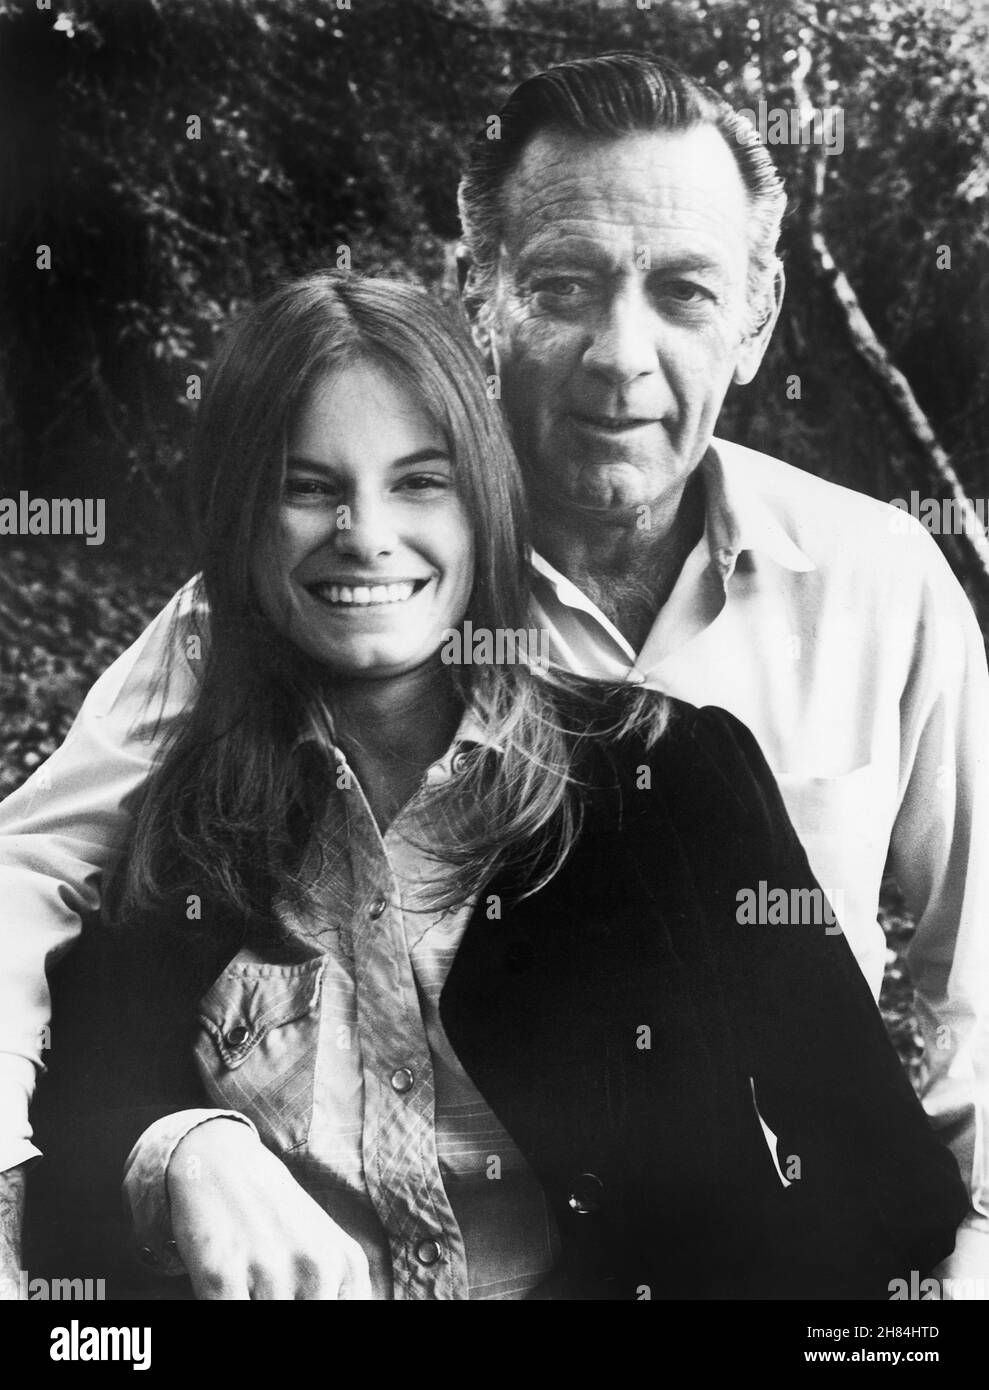 William Holden, Kay Lenz, on-set of the Film, 'Breezy', Universal Pictures, 1973 Stock Photo